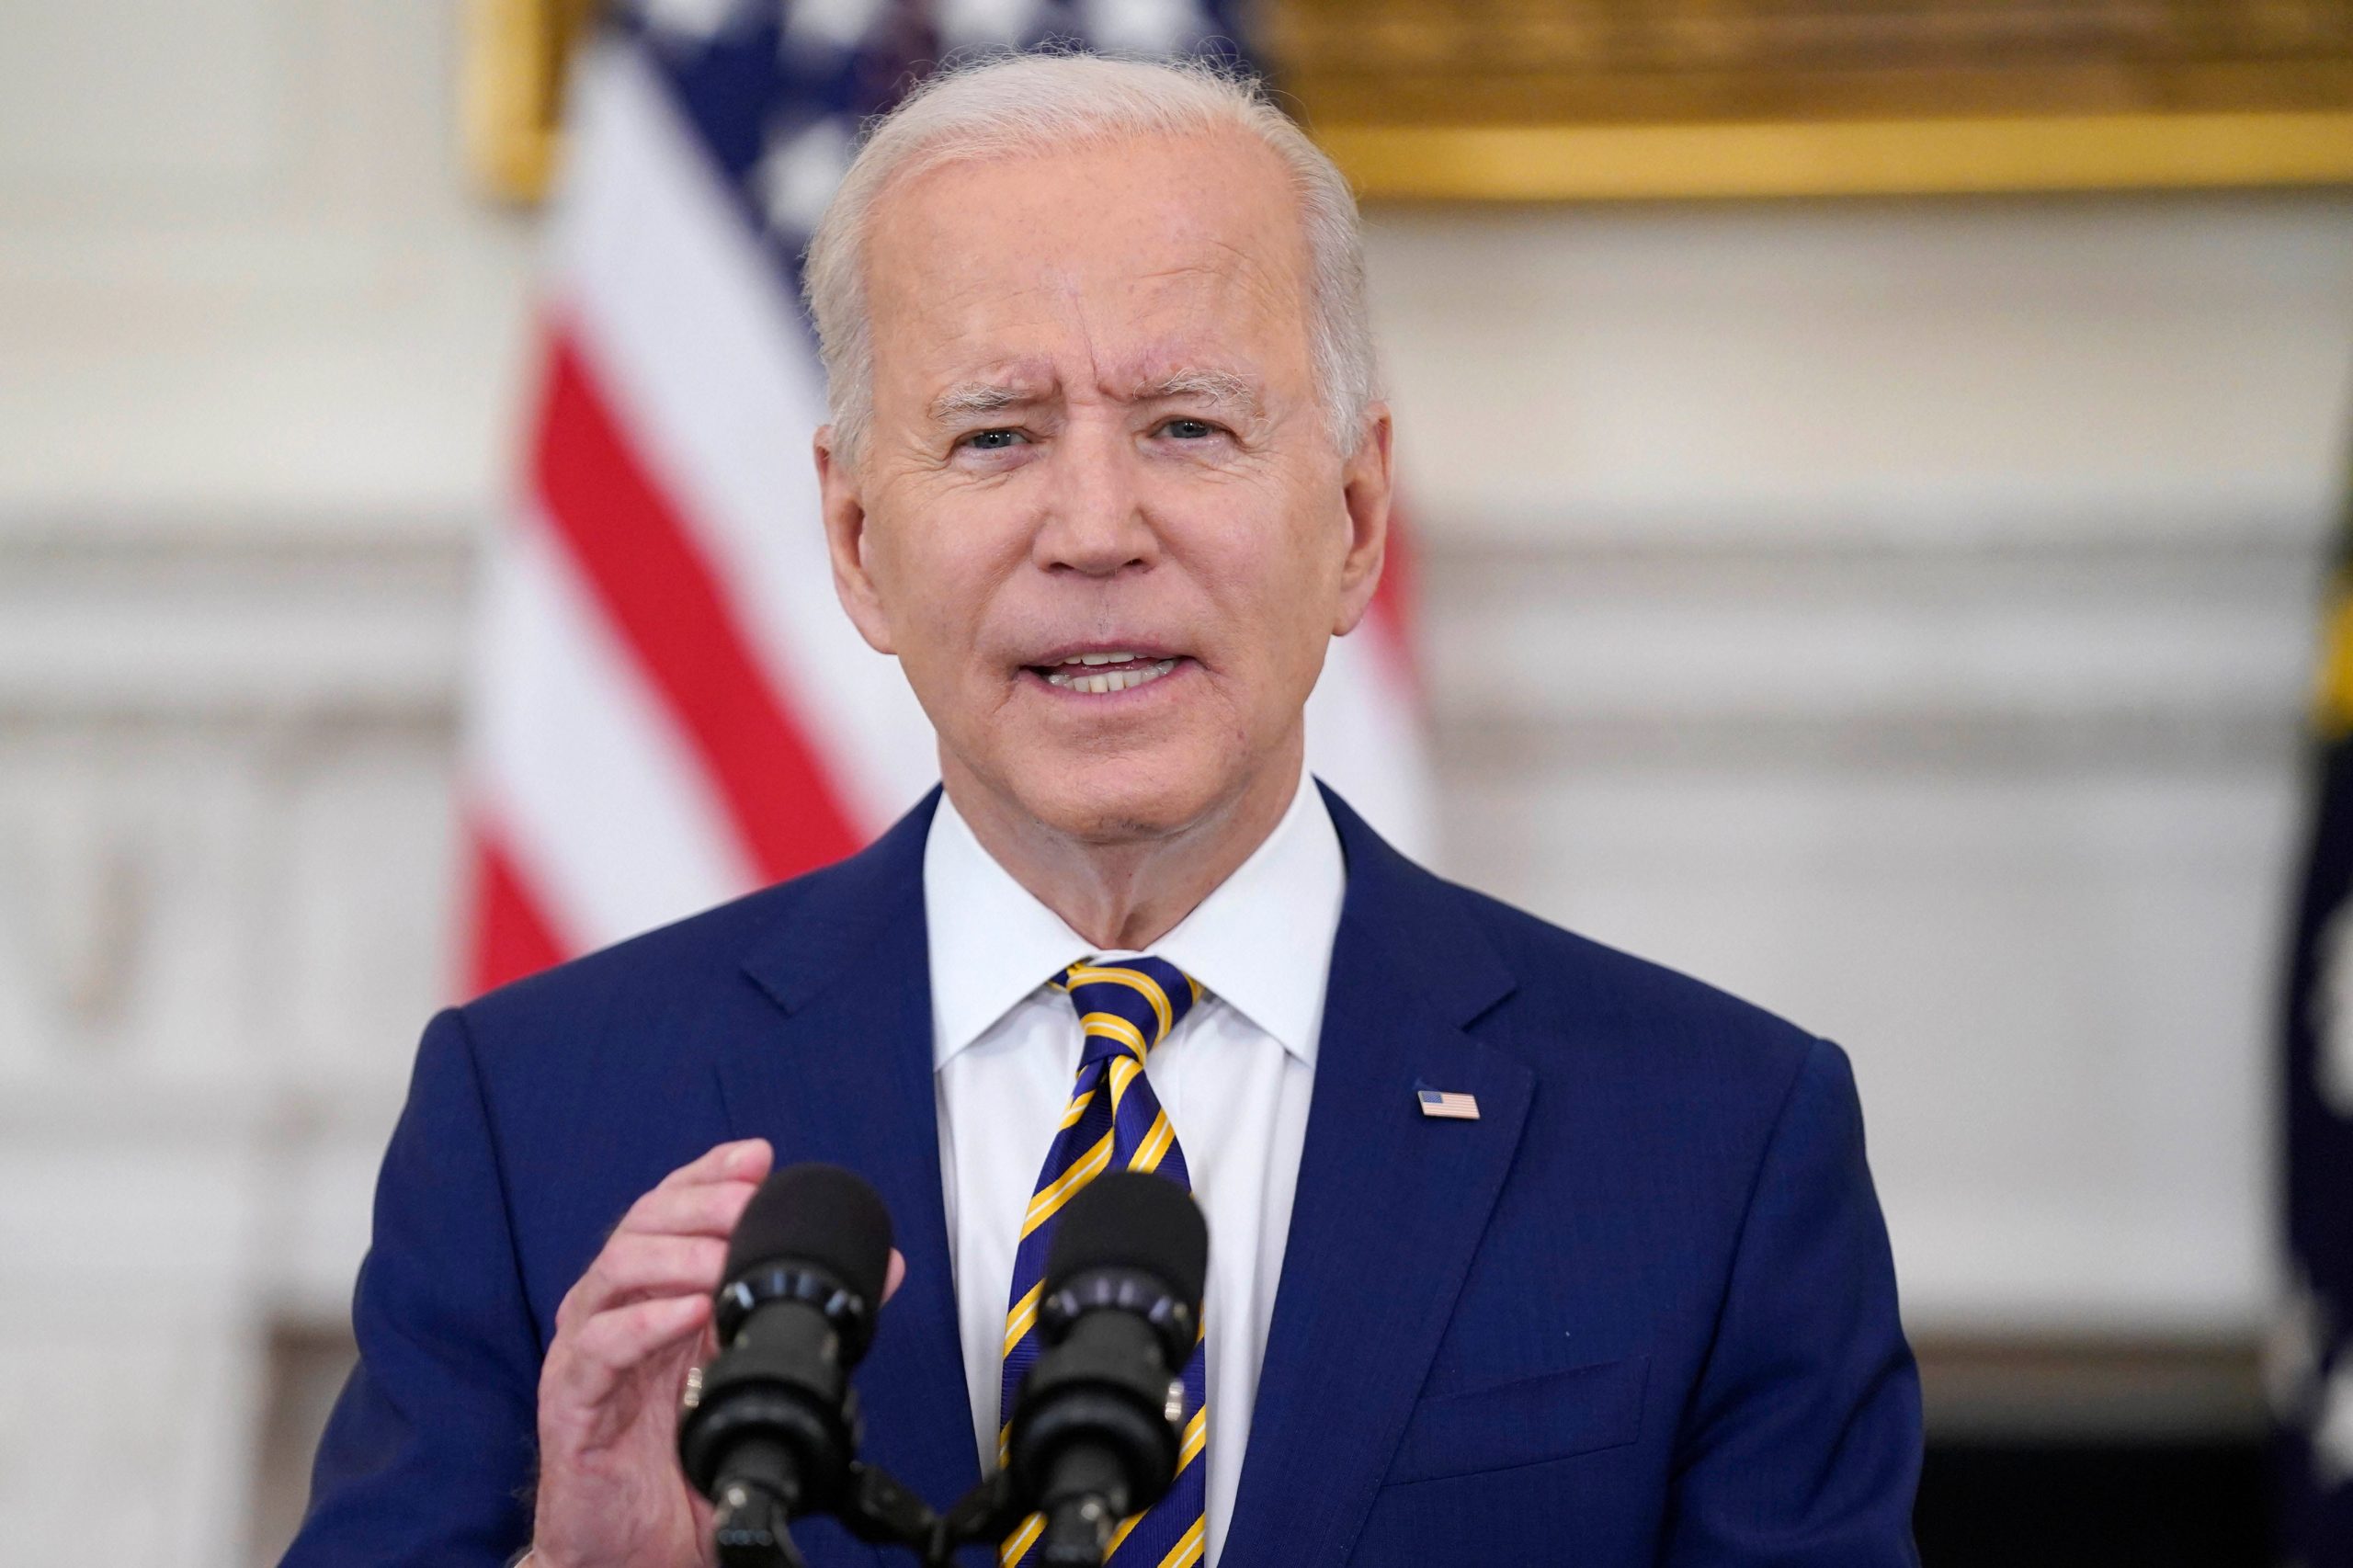 Joe Biden reaches a deal with bipartisan group of senators on infra package